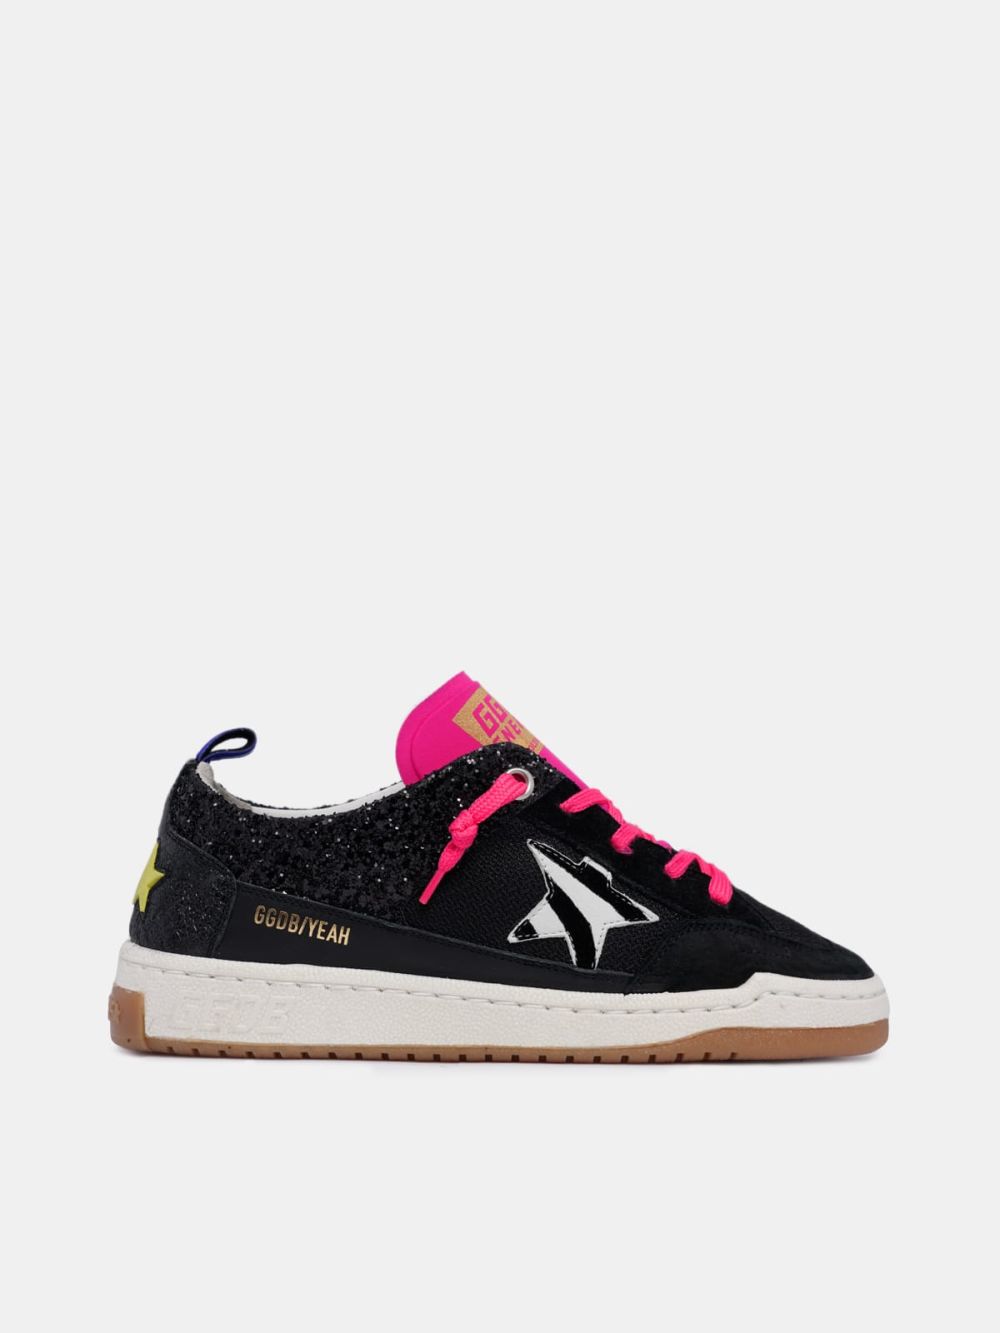 Golden Goose Yeah sneakers with glitter and zebra-print star Black ...